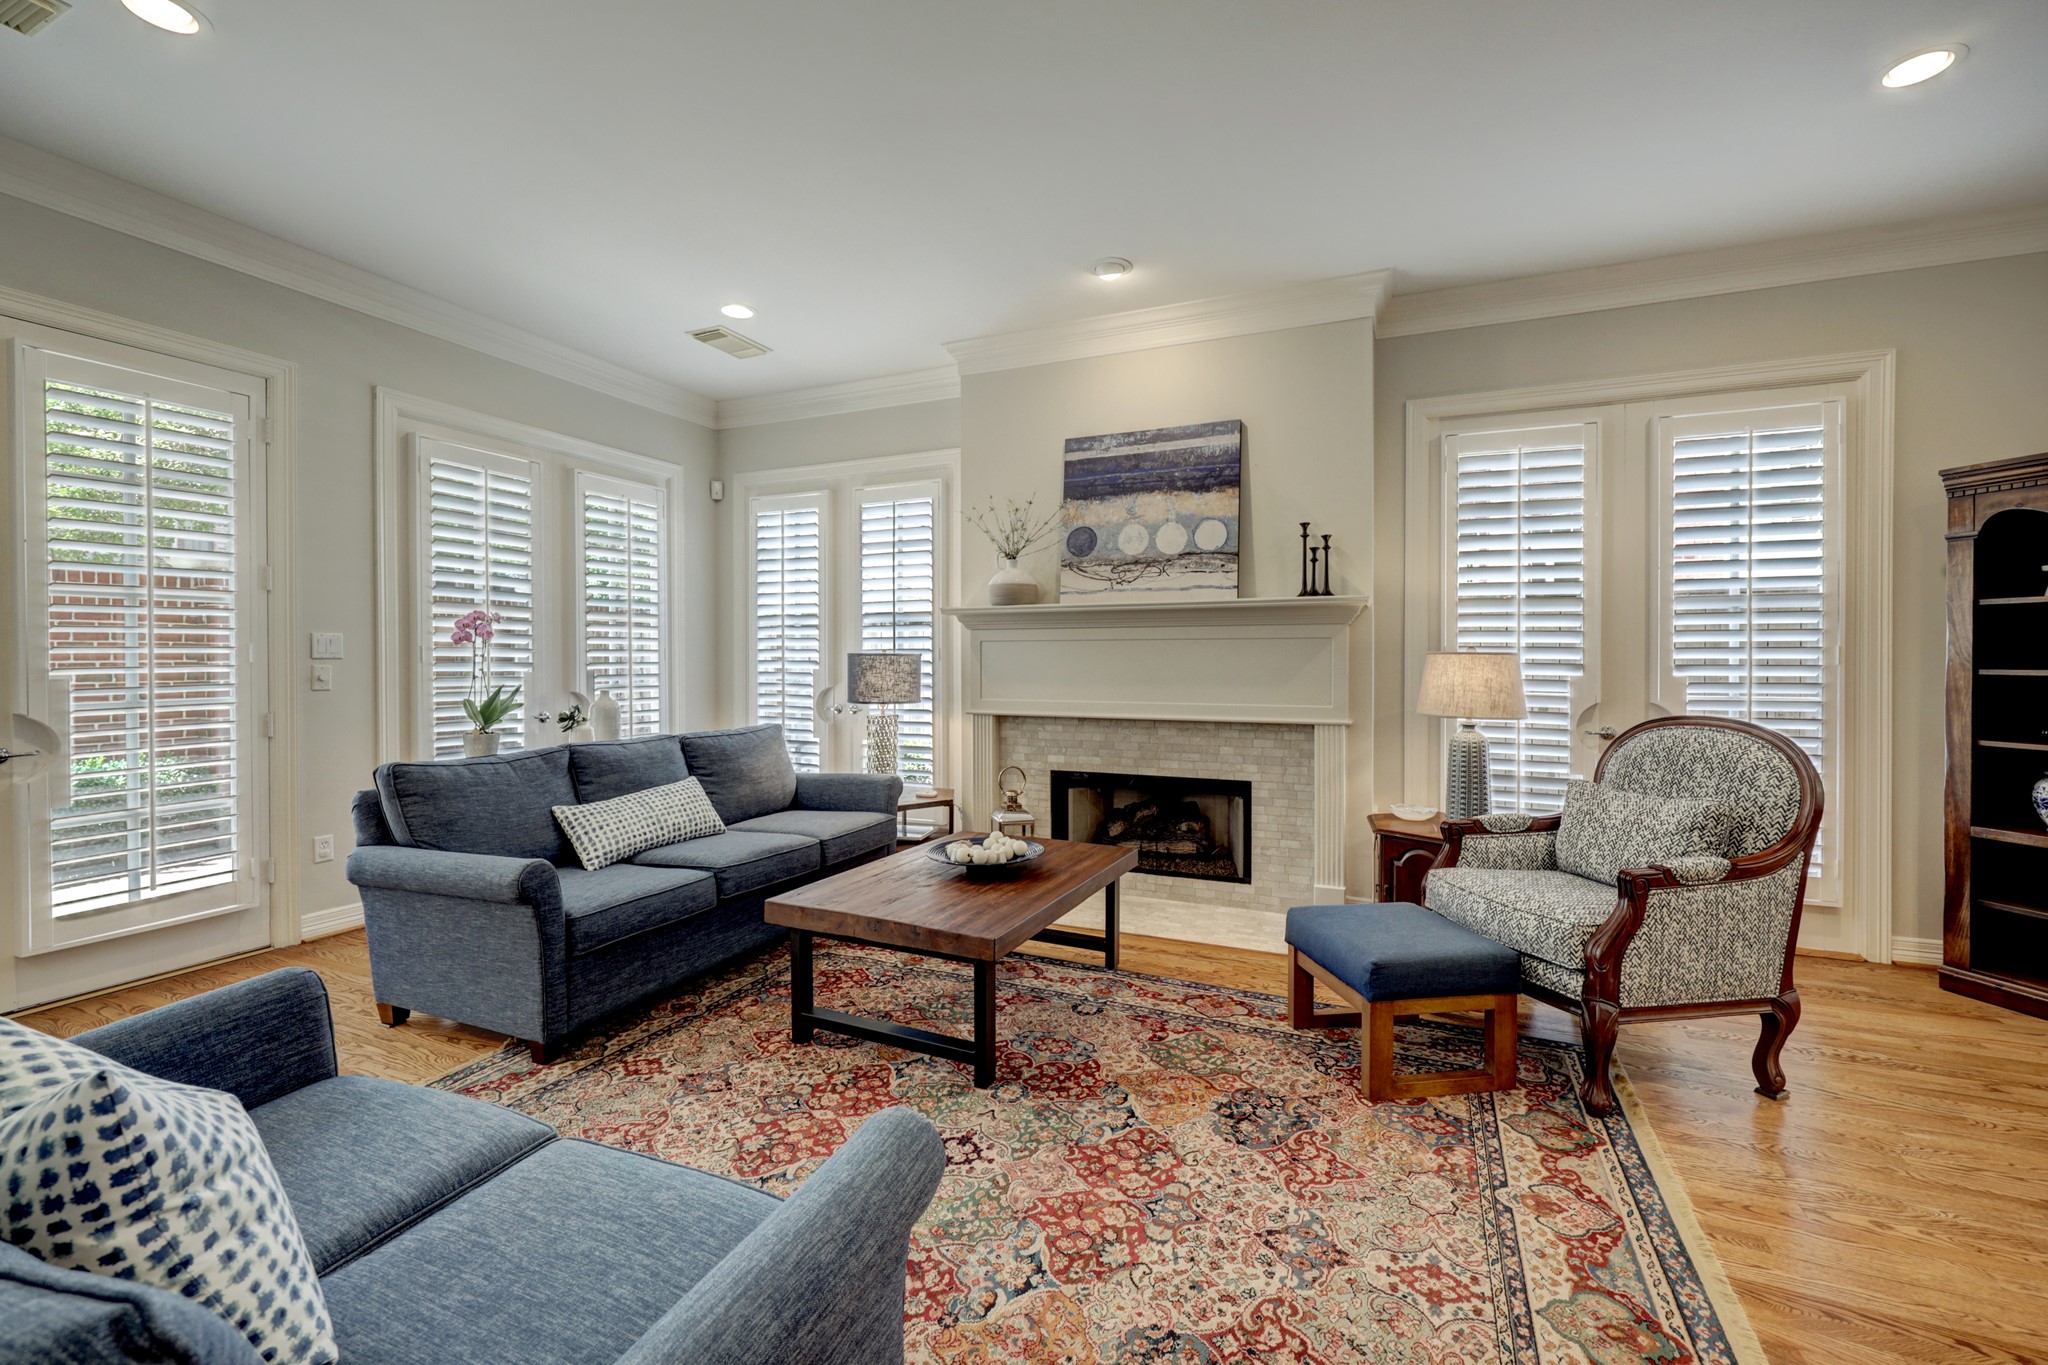 Welcome to 3402 Sagecircle! This meticulously maintained home is located in the quiet gated community of Sage Square. A gas fireplace with mantle serves as the focal point of the comfortable, light-filled family room. All windows have plantation shutters.